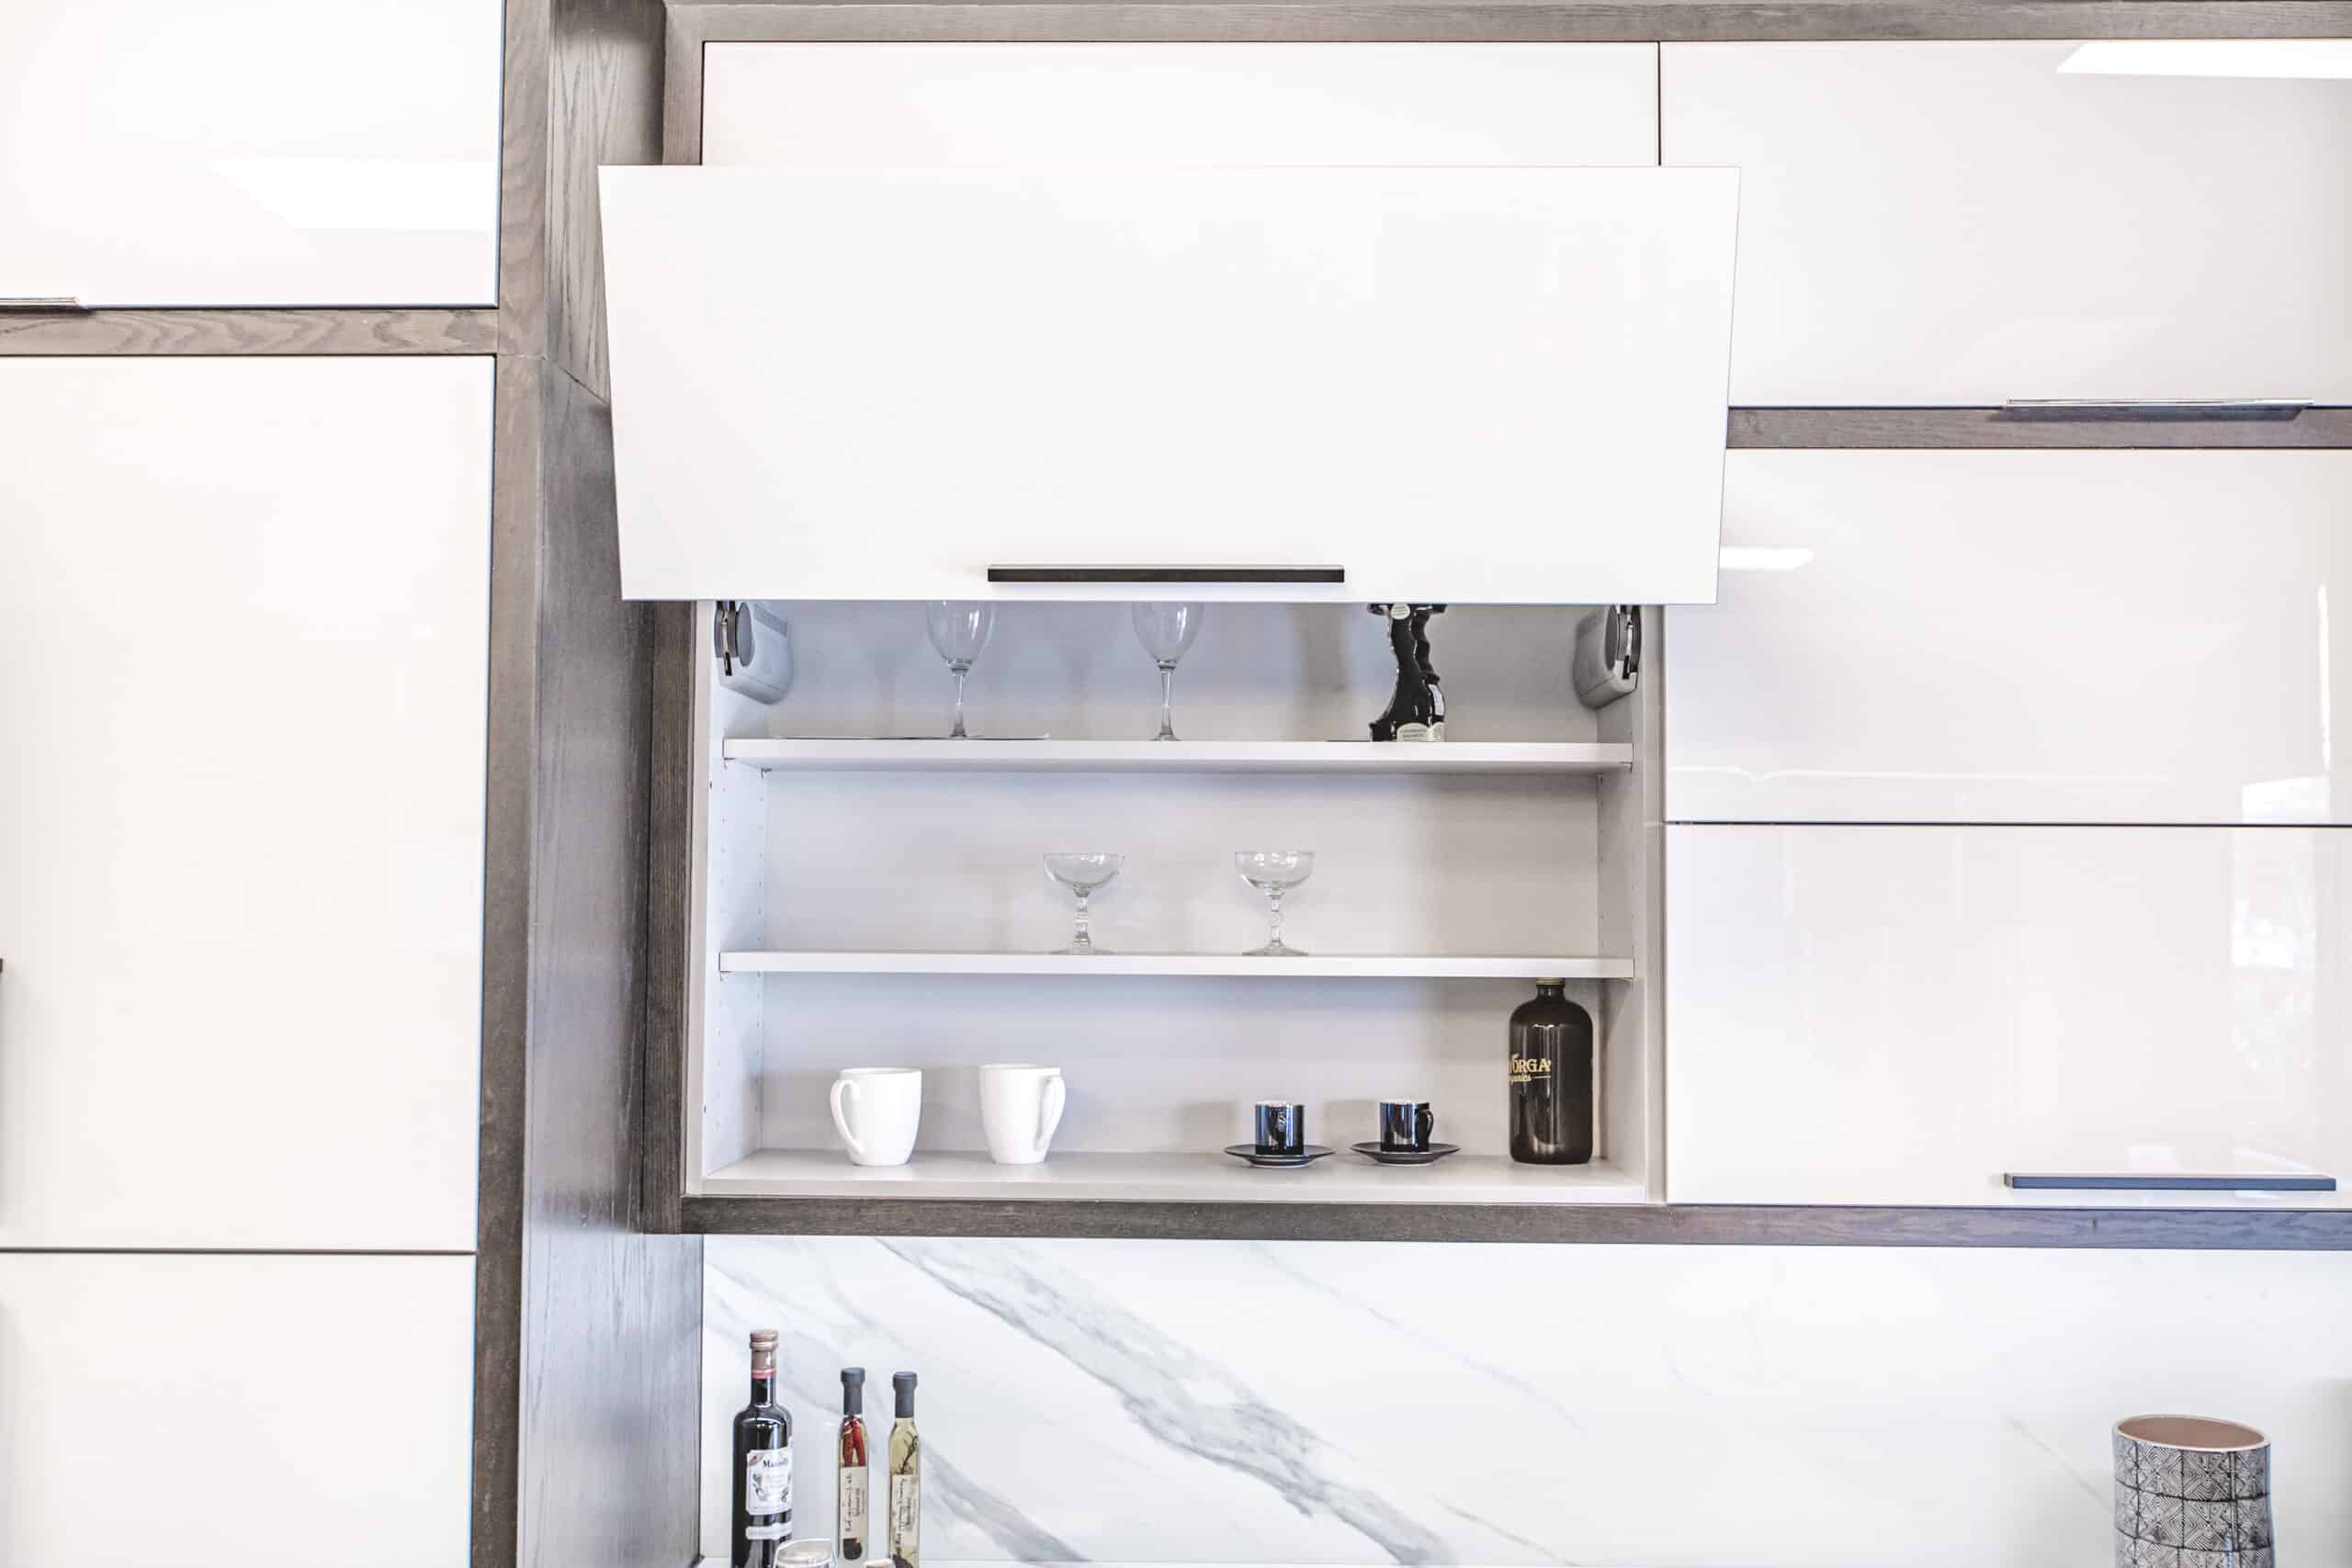 A kitchen with sleek white cabinets and a matching white countertop